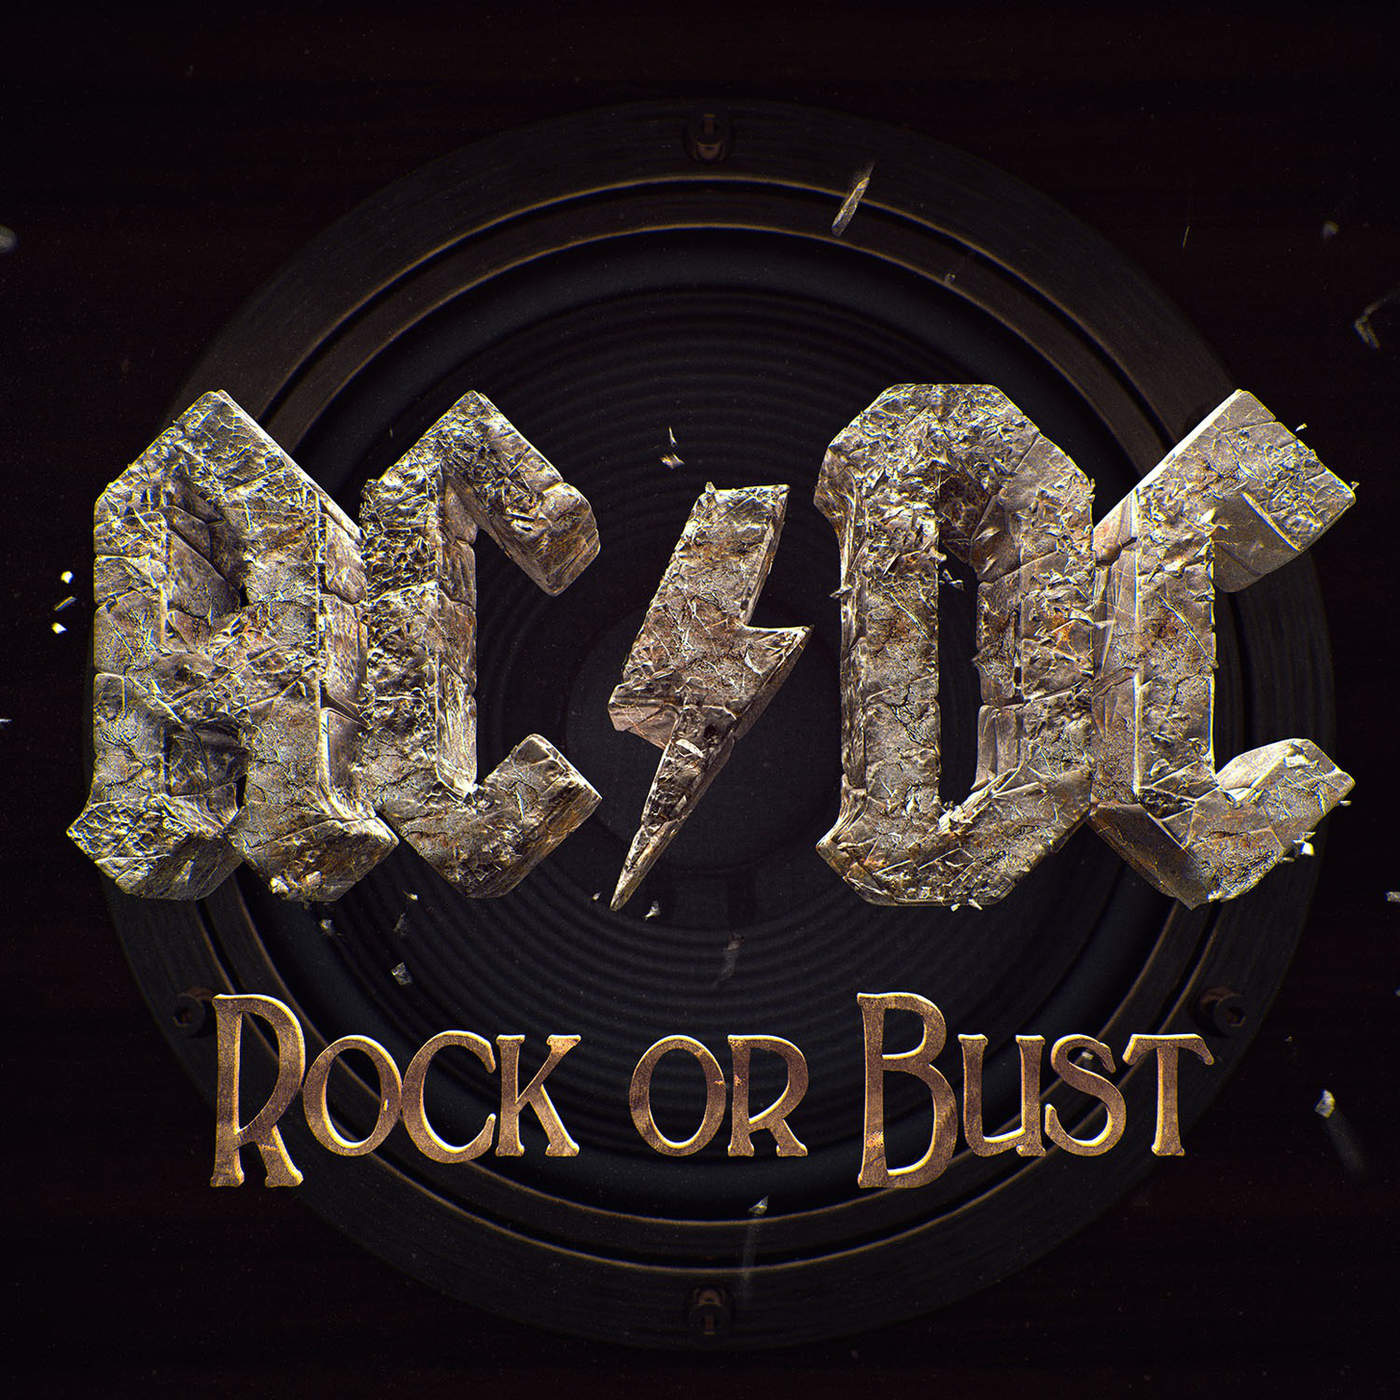 Art for Play Ball by AC/DC